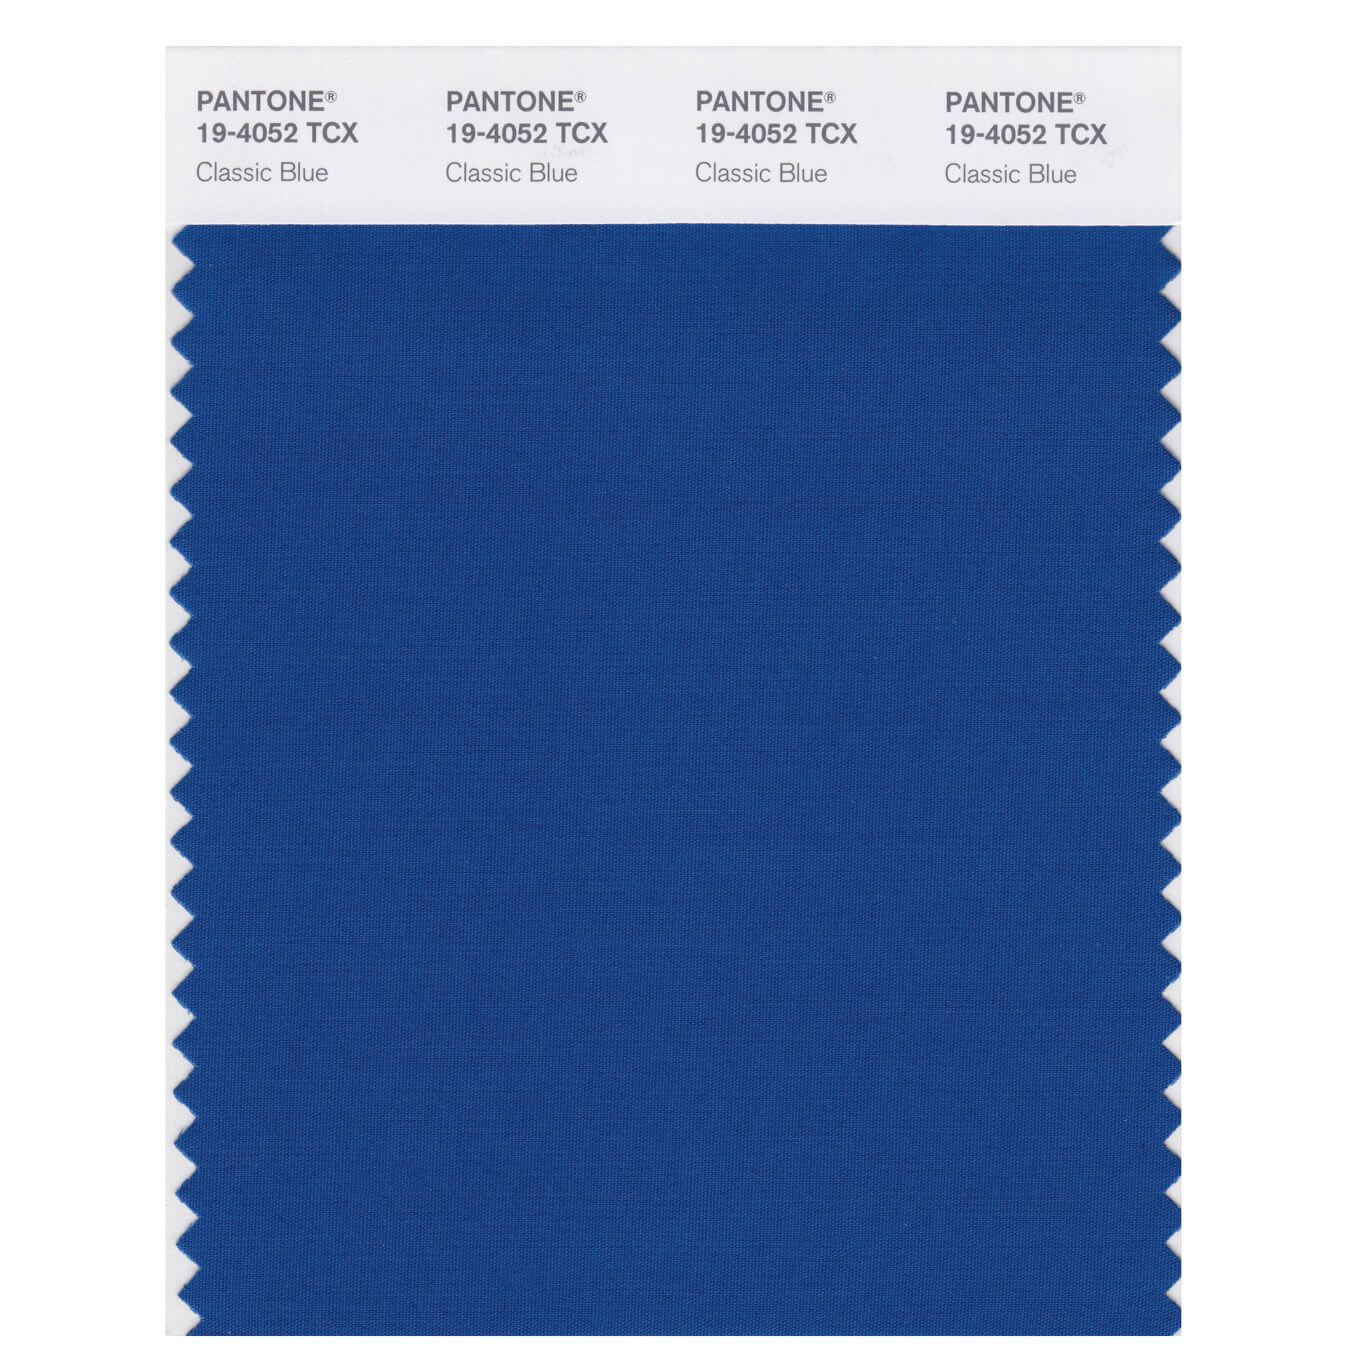 Pantone Color of The Year Classic Blue